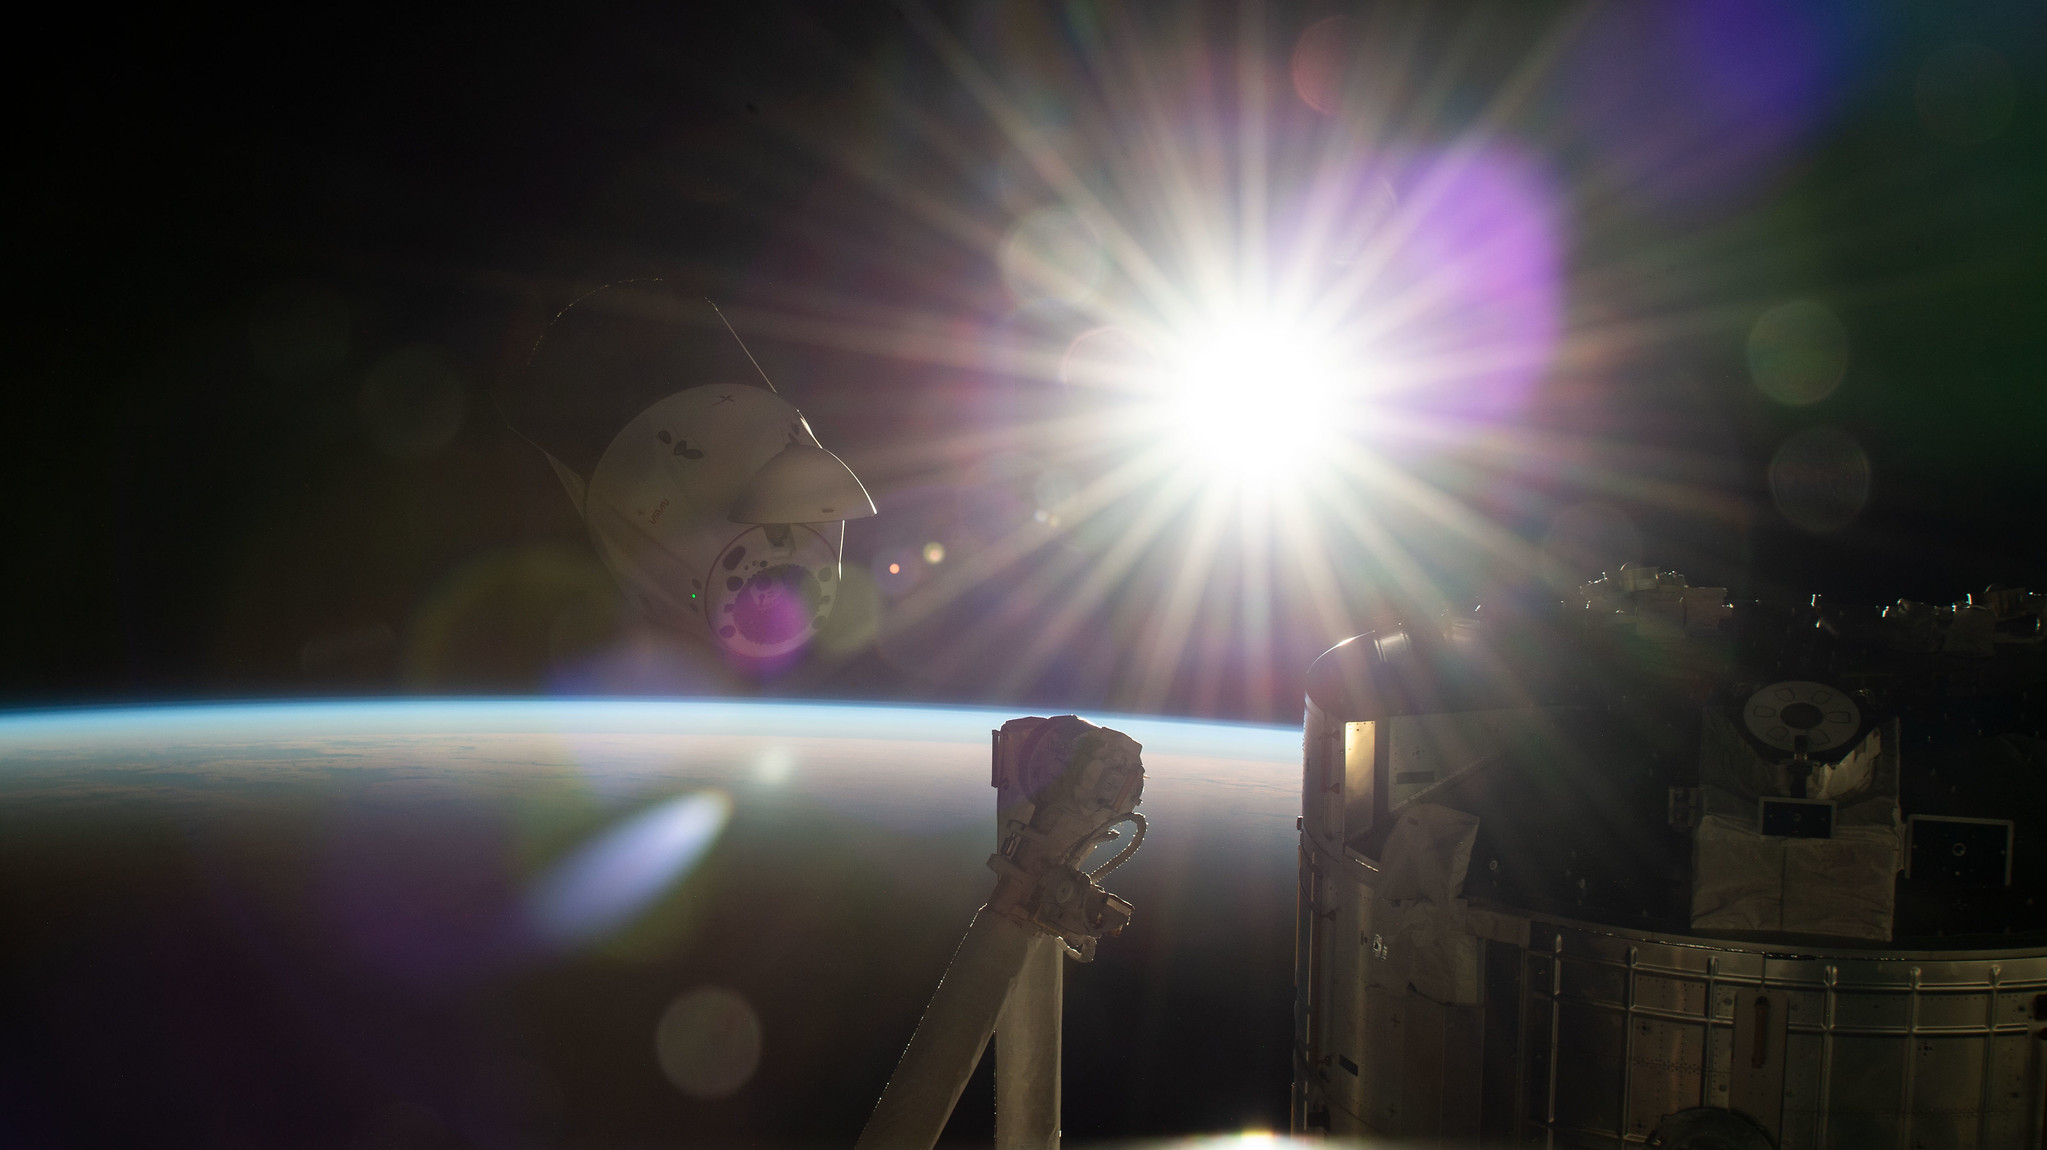 image of the Dragon capsule undocking from space station with sun in background